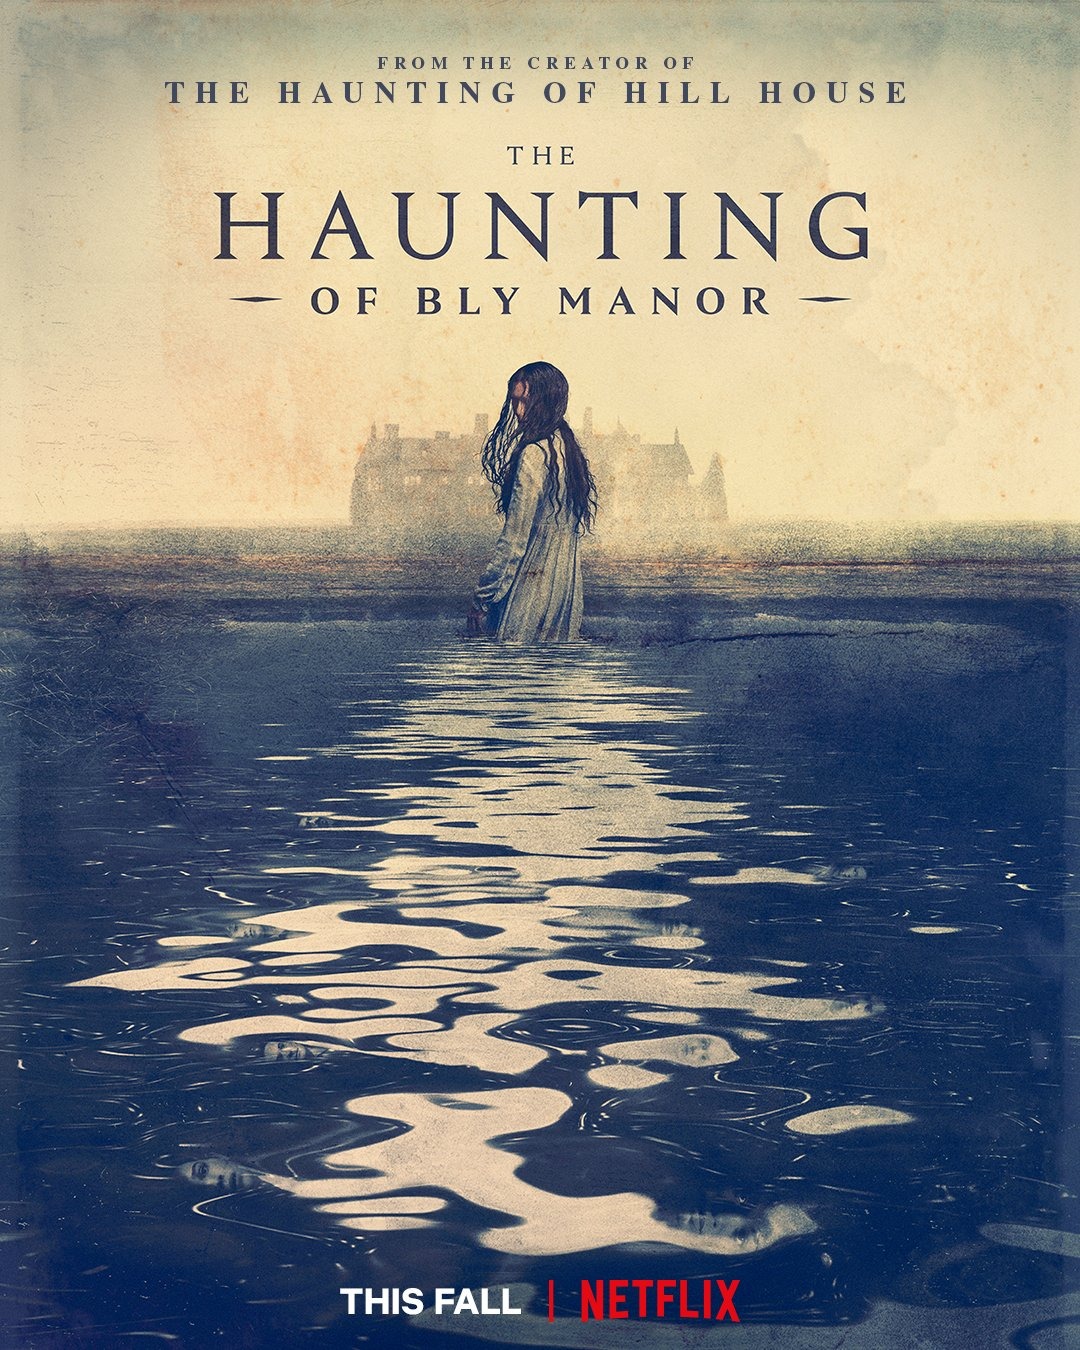 The Haunting of Bly Manor - Horror Webseries